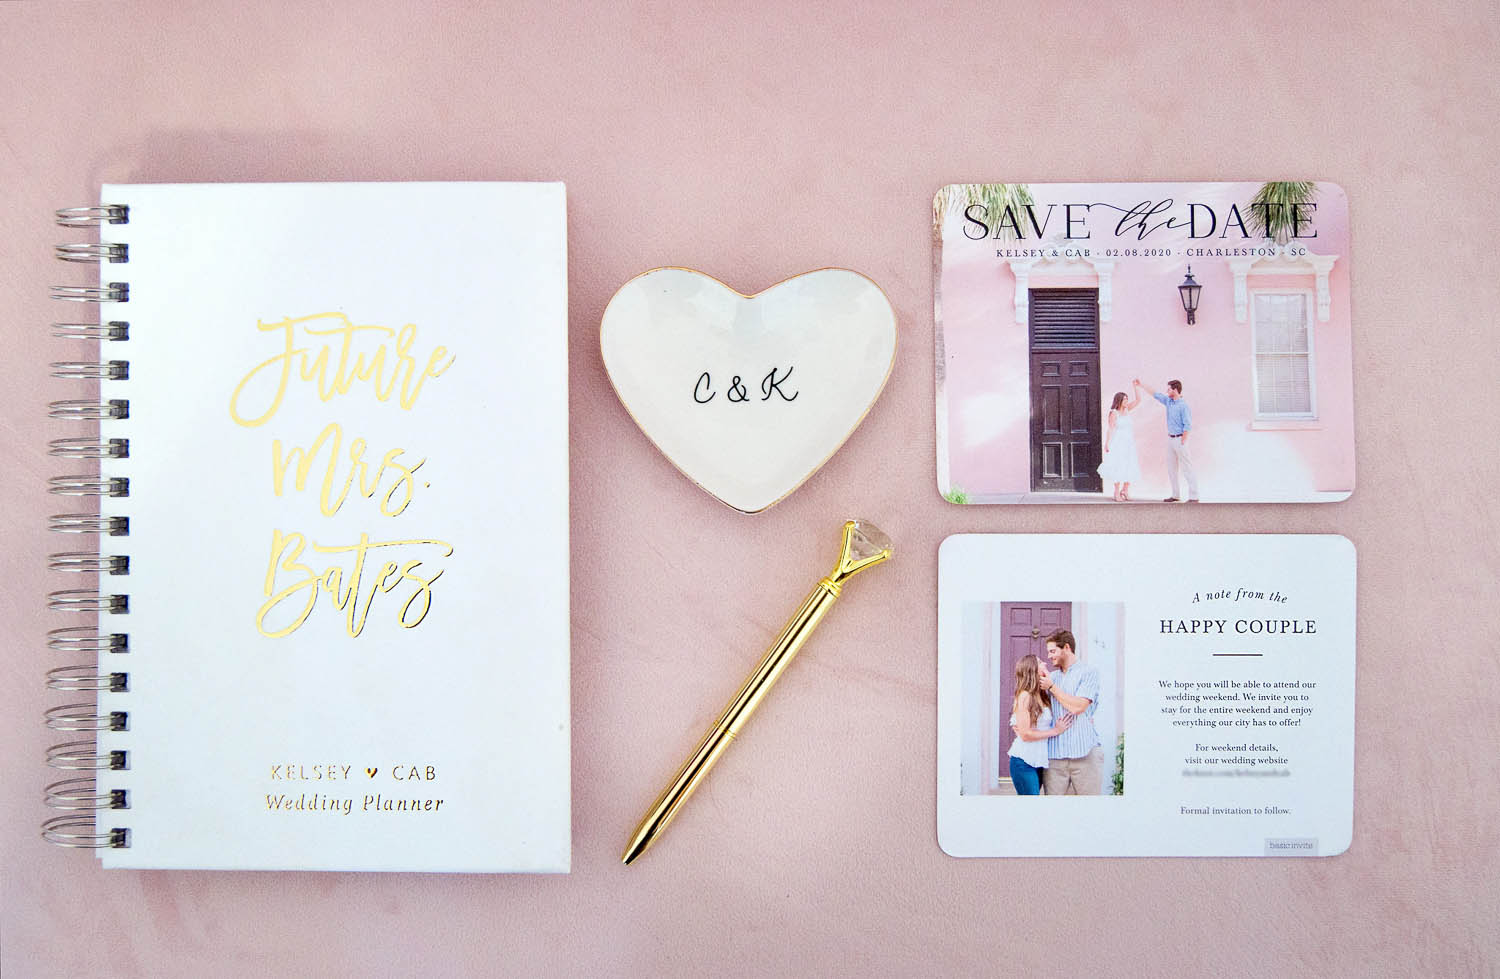 The Dos and Don'ts of Save The Dates - Chasing Cinderella